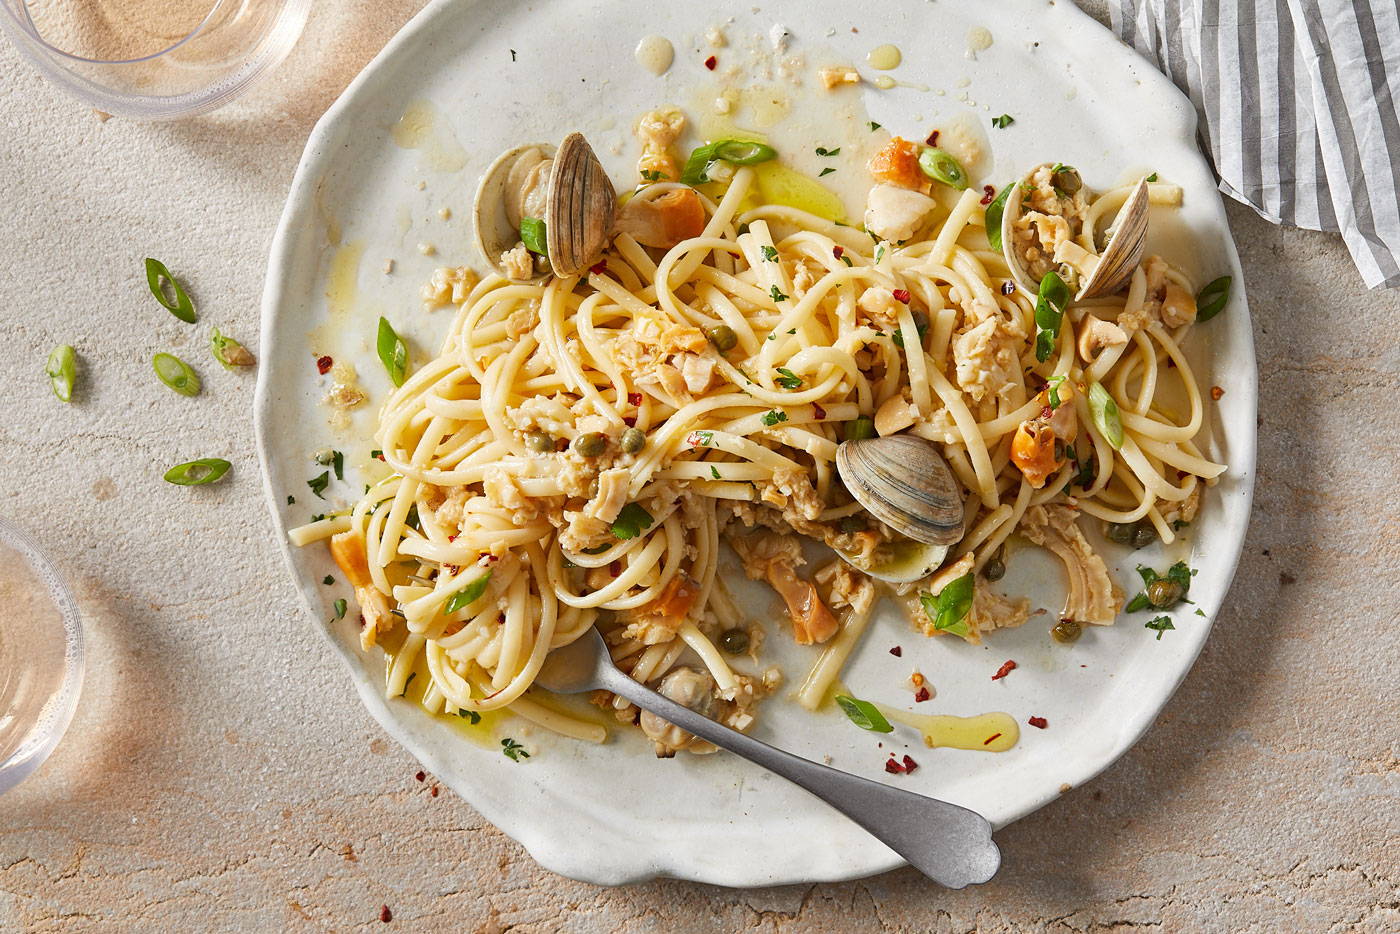 Linguine with clams in shells served on a plate